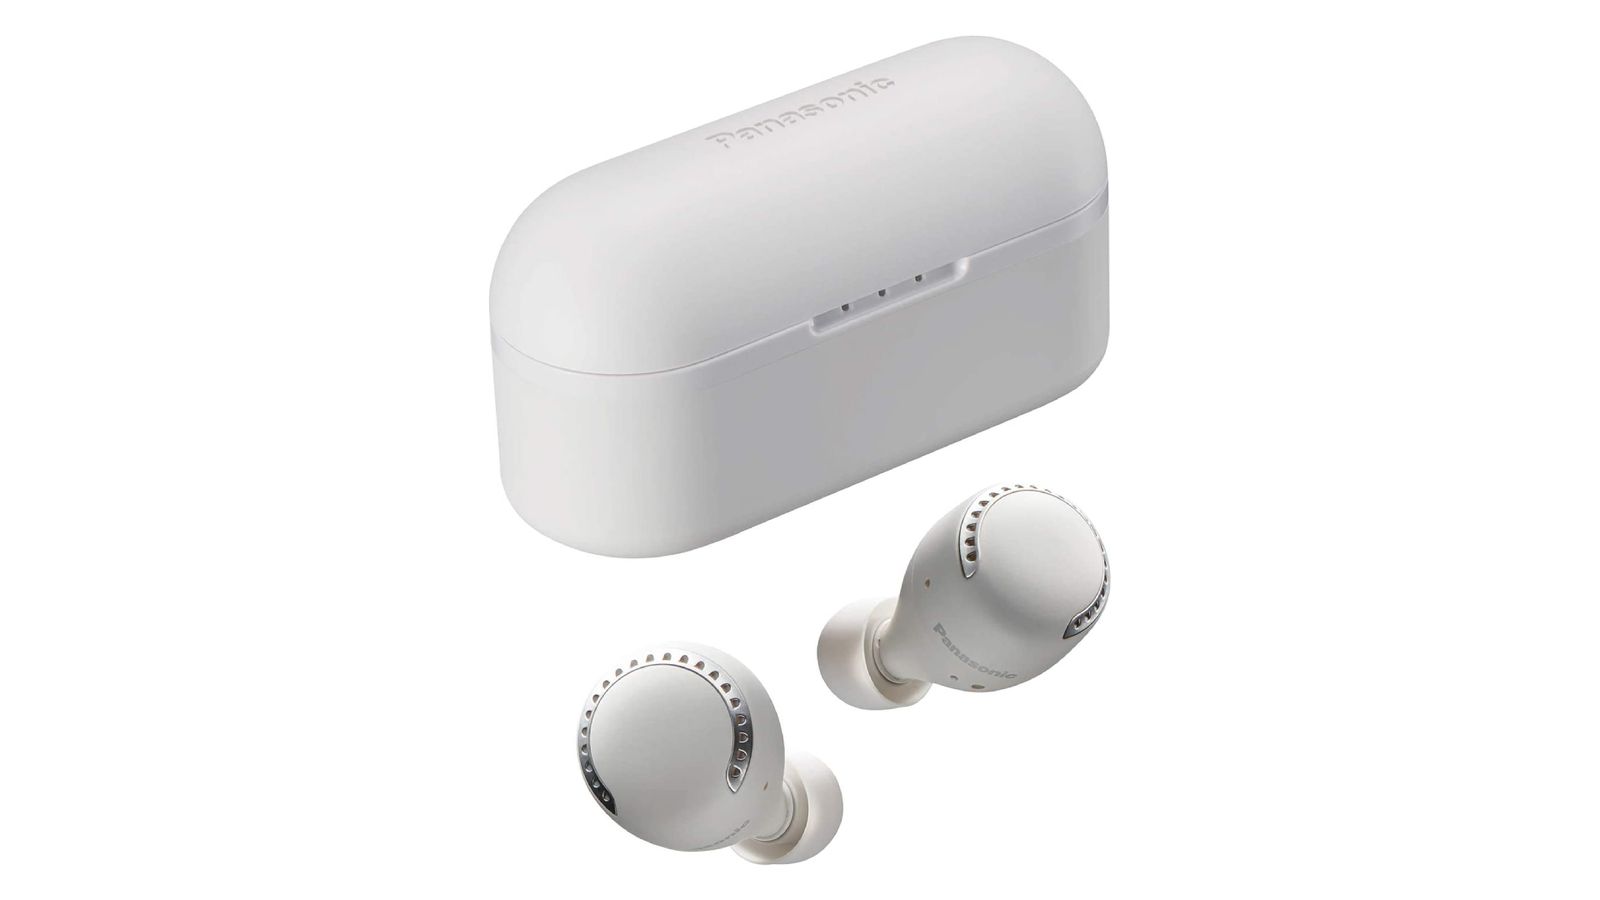 Best Android earbuds - Panasonic RZ-S500W product image of a pair of white, round earbuds next to their white charging case.